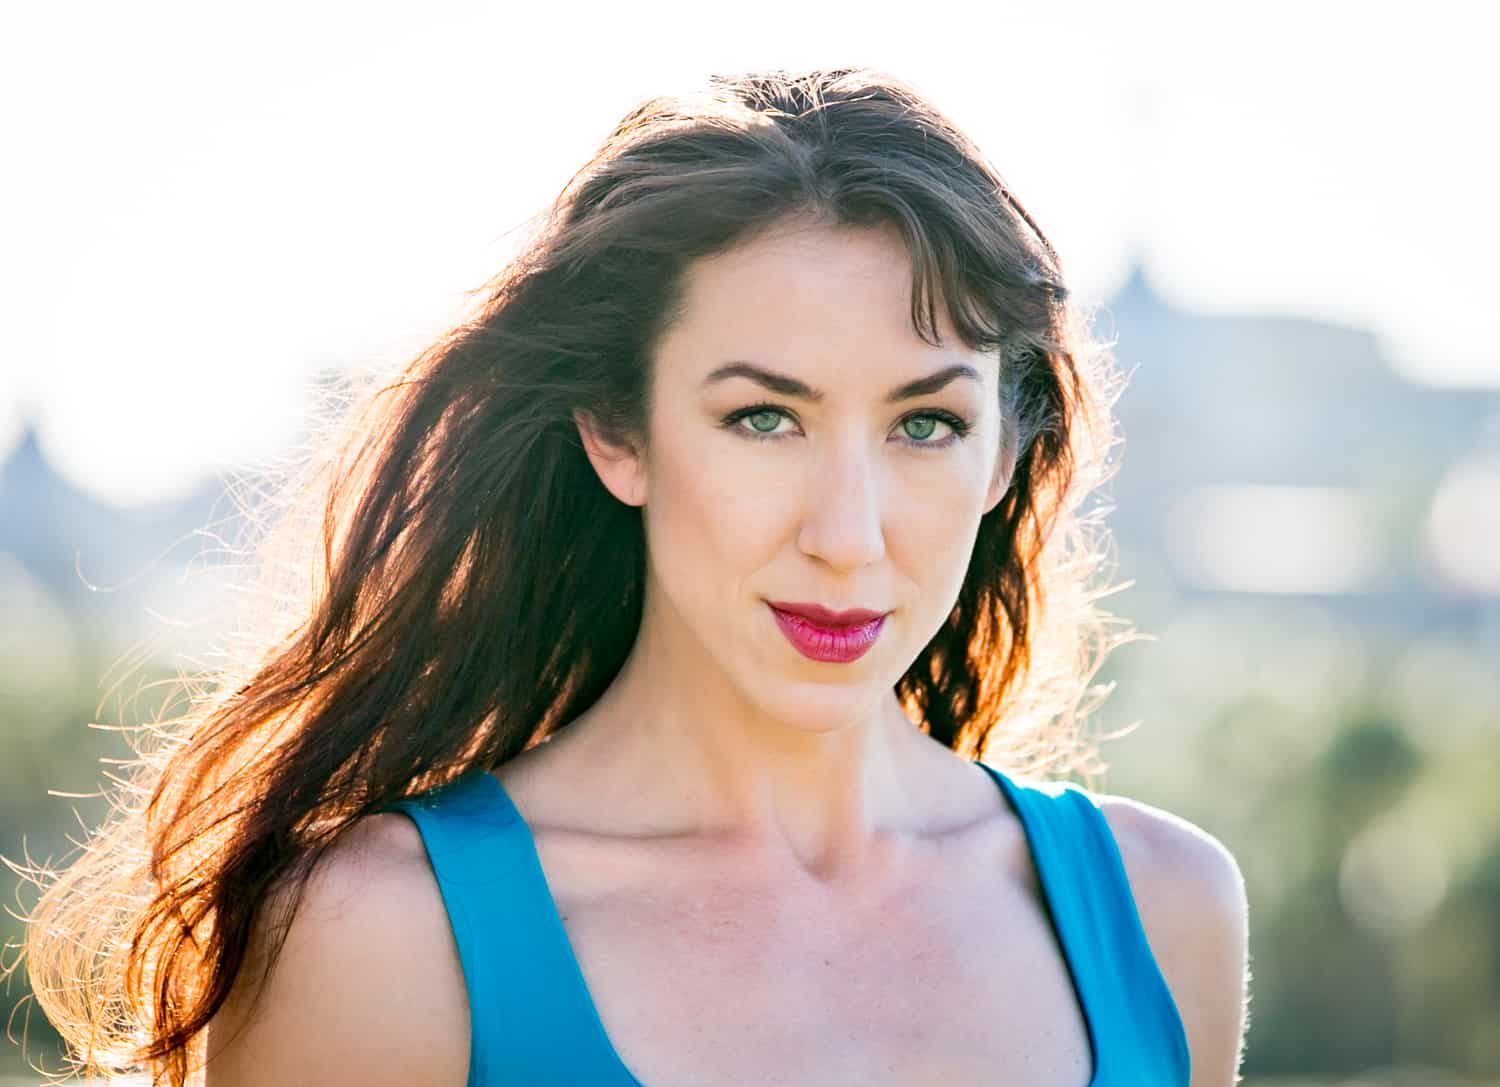 Acting headshots of model with long dark hair and blue tank top